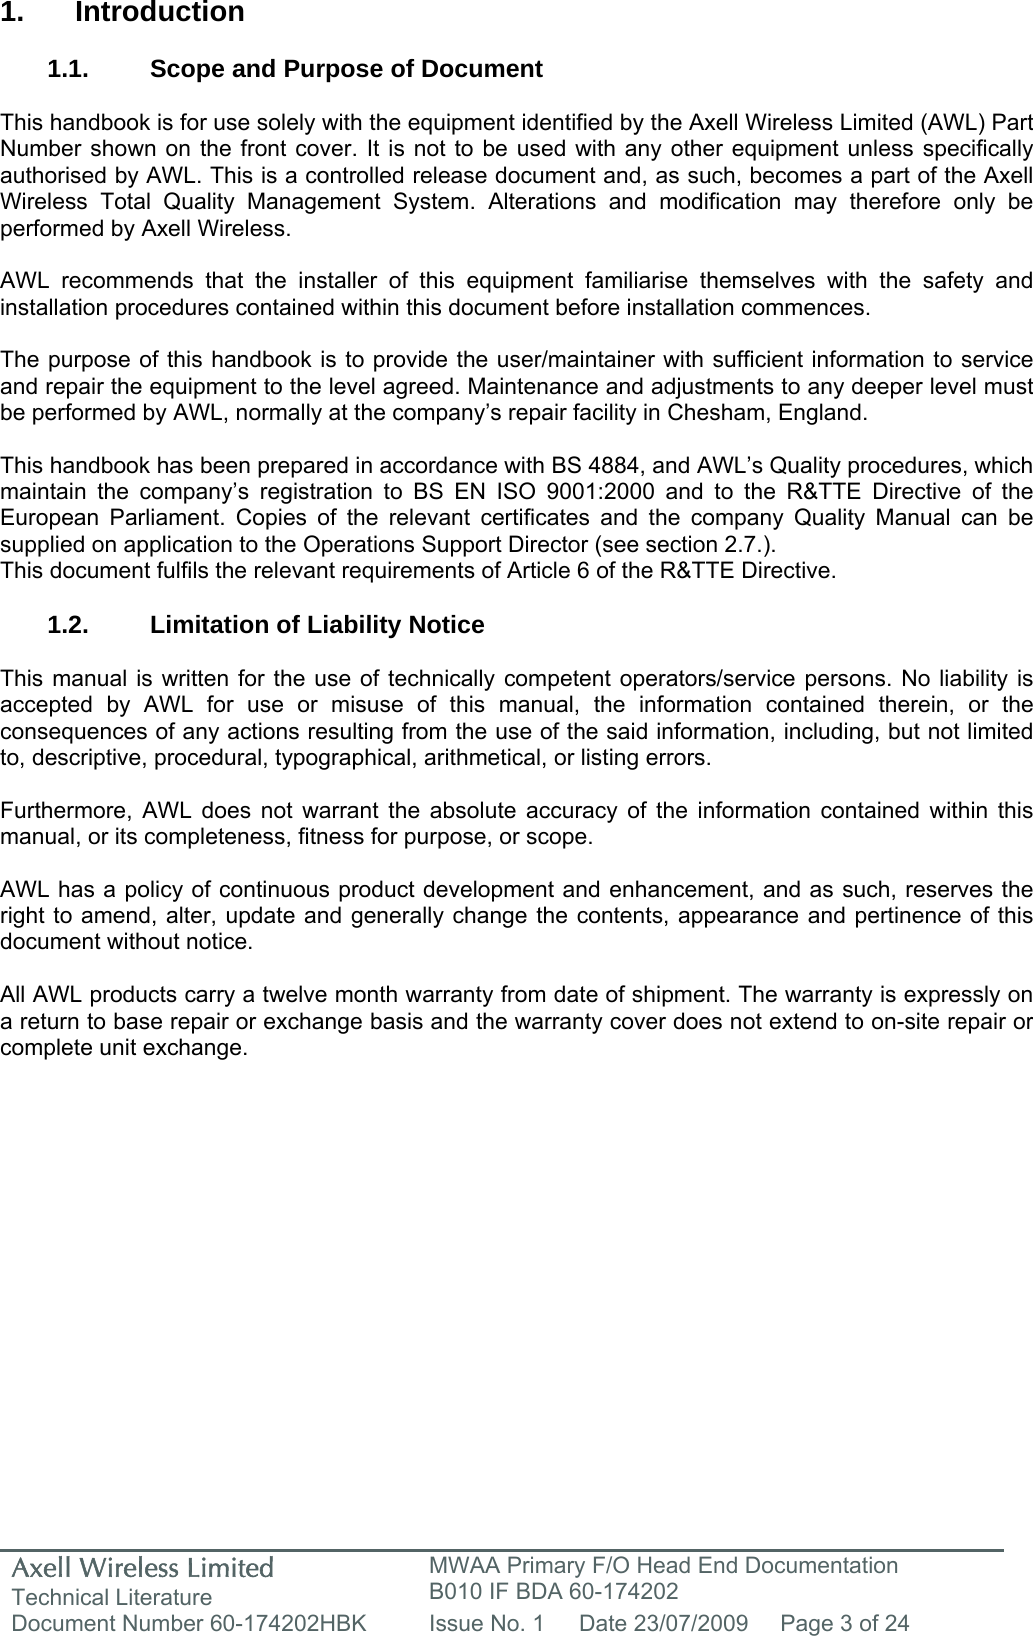 Axell Wireless Limited Technical Literature MWAA Primary F/O Head End Documentation B010 IF BDA 60-174202 Document Number 60-174202HBK  Issue No. 1  Date 23/07/2009  Page 3 of 24   1. Introduction  1.1.  Scope and Purpose of Document  This handbook is for use solely with the equipment identified by the Axell Wireless Limited (AWL) Part Number shown on the front cover. It is not to be used with any other equipment unless specifically authorised by AWL. This is a controlled release document and, as such, becomes a part of the Axell Wireless Total Quality Management System. Alterations and modification may therefore only be performed by Axell Wireless.  AWL recommends that the installer of this equipment familiarise themselves with the safety and installation procedures contained within this document before installation commences.  The purpose of this handbook is to provide the user/maintainer with sufficient information to service and repair the equipment to the level agreed. Maintenance and adjustments to any deeper level must be performed by AWL, normally at the company’s repair facility in Chesham, England.  This handbook has been prepared in accordance with BS 4884, and AWL’s Quality procedures, which maintain the company’s registration to BS EN ISO 9001:2000 and to the R&amp;TTE Directive of the European Parliament. Copies of the relevant certificates and the company Quality Manual can be supplied on application to the Operations Support Director (see section 2.7.). This document fulfils the relevant requirements of Article 6 of the R&amp;TTE Directive.  1.2. Limitation of Liability Notice  This manual is written for the use of technically competent operators/service persons. No liability is accepted by AWL for use or misuse of this manual, the information contained therein, or the consequences of any actions resulting from the use of the said information, including, but not limited to, descriptive, procedural, typographical, arithmetical, or listing errors.  Furthermore, AWL does not warrant the absolute accuracy of the information contained within this manual, or its completeness, fitness for purpose, or scope.  AWL has a policy of continuous product development and enhancement, and as such, reserves the right to amend, alter, update and generally change the contents, appearance and pertinence of this document without notice.  All AWL products carry a twelve month warranty from date of shipment. The warranty is expressly on a return to base repair or exchange basis and the warranty cover does not extend to on-site repair or complete unit exchange.  